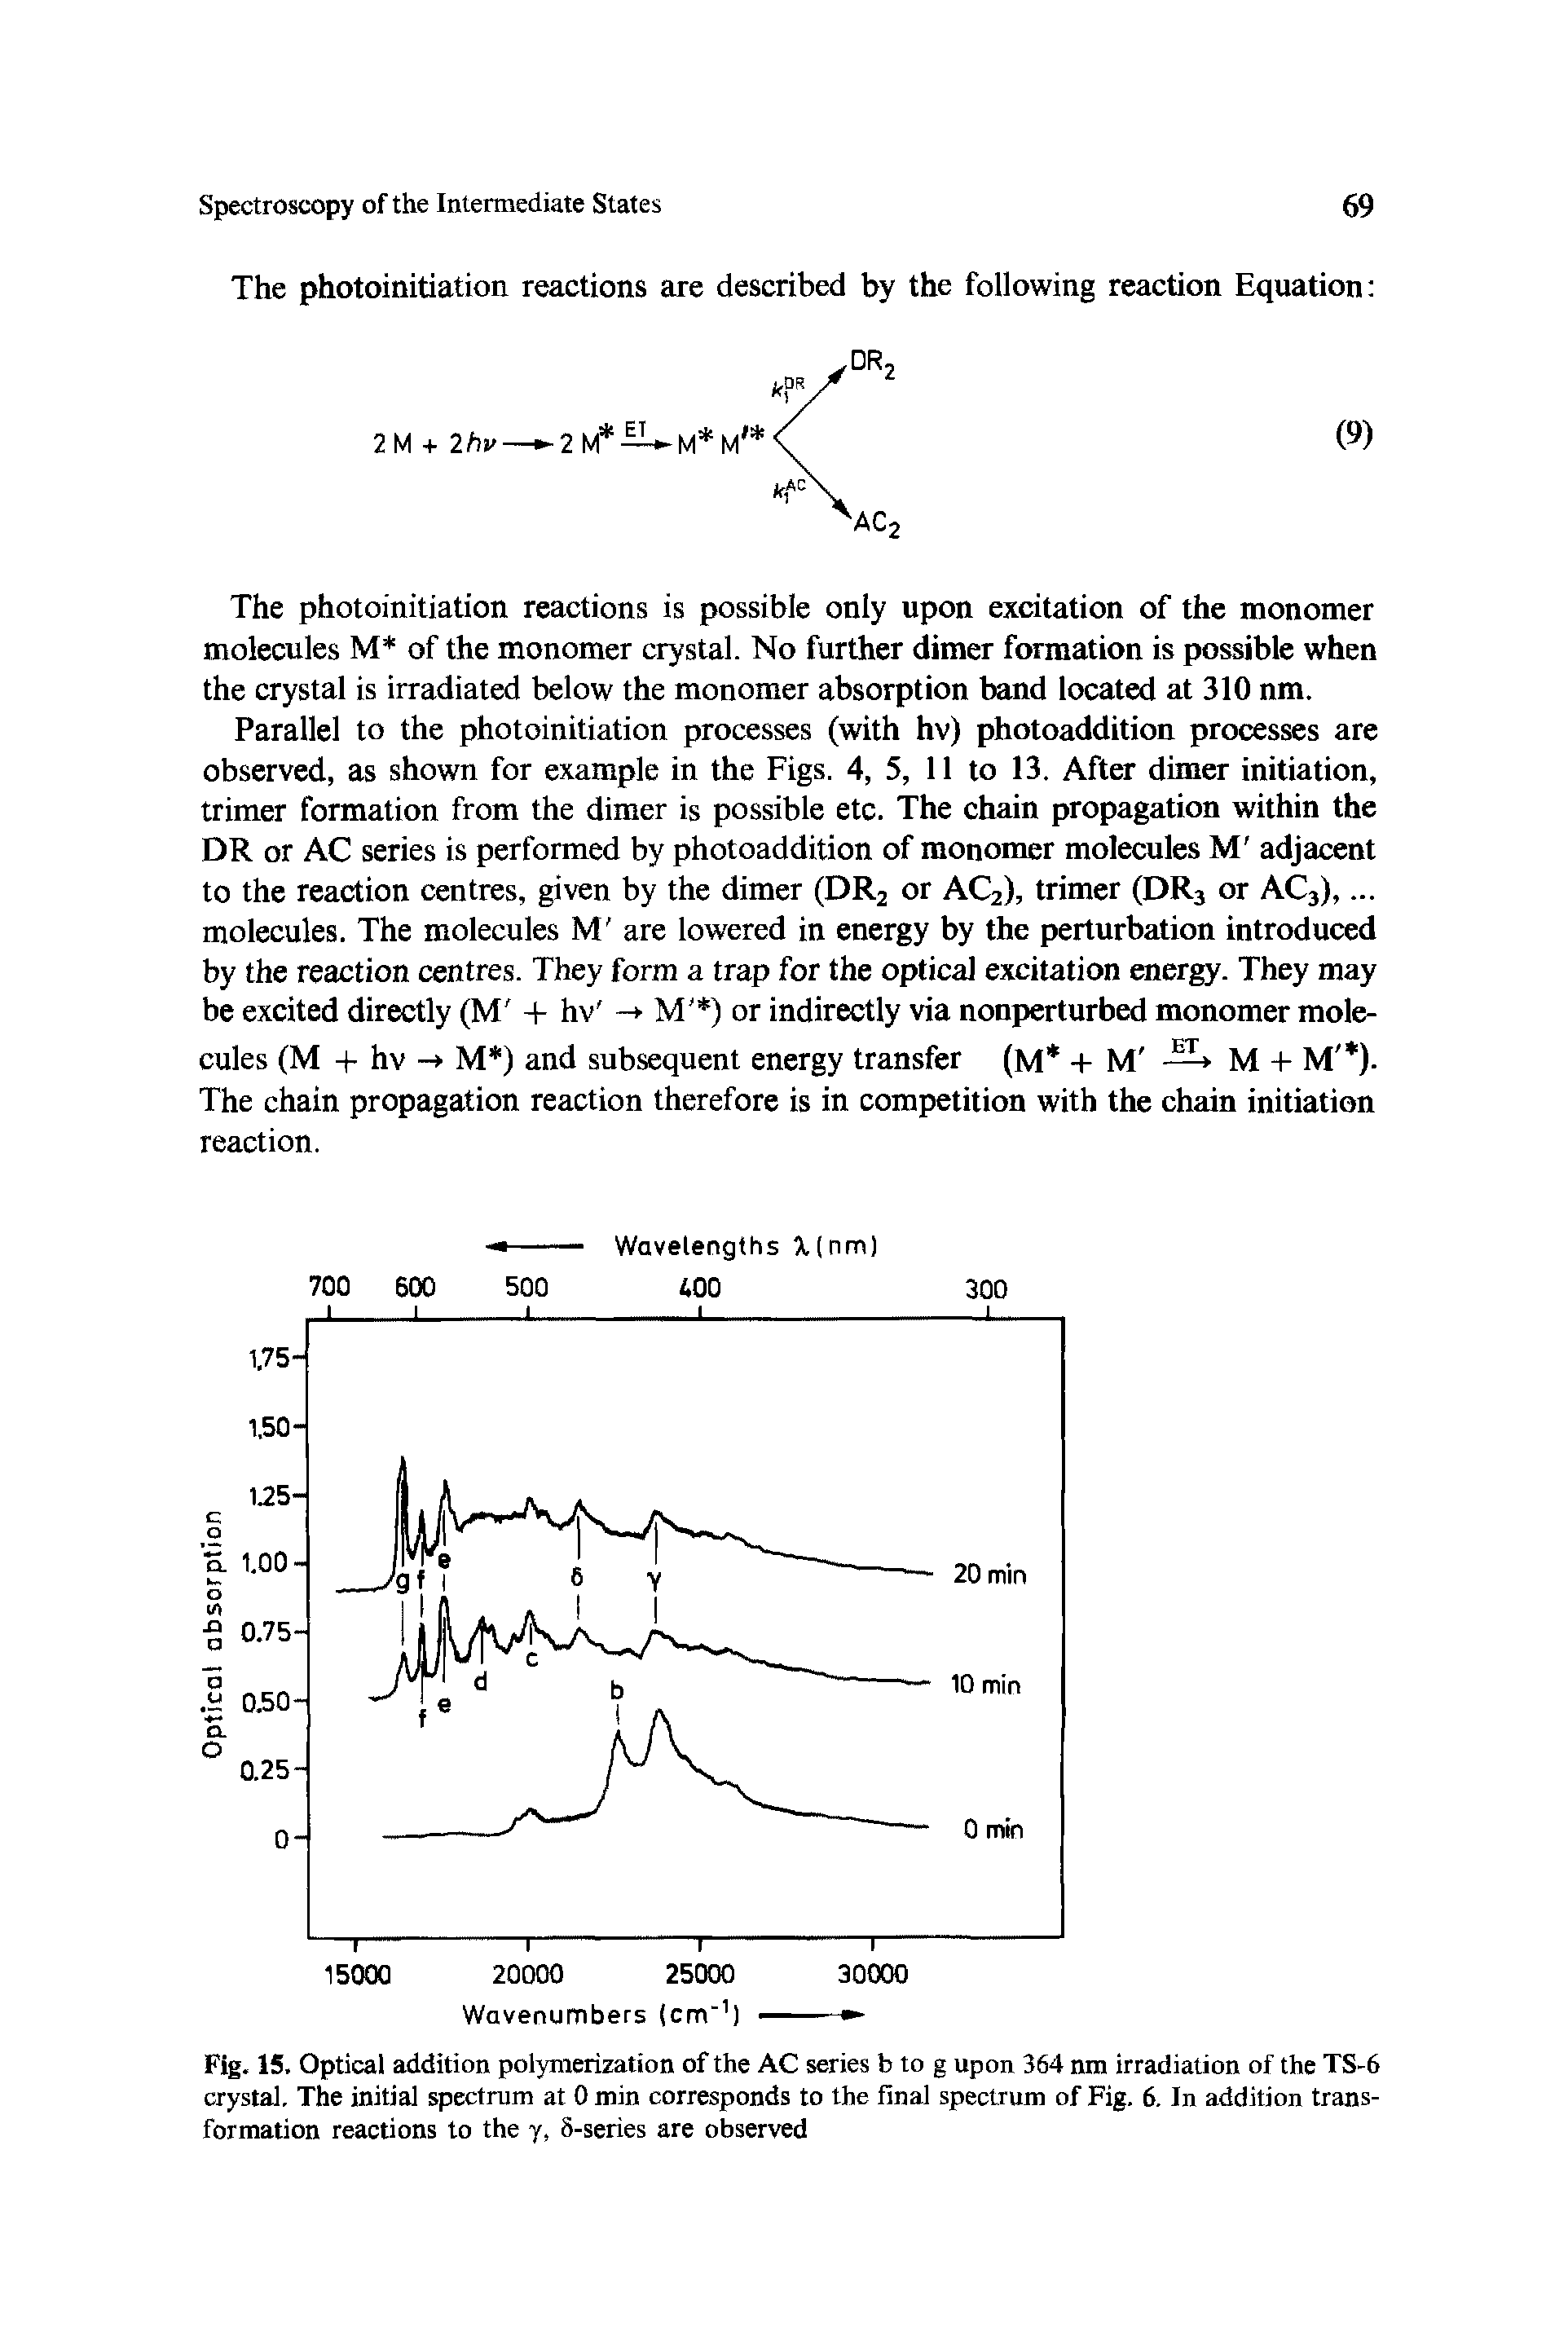 Fig. 15. Optical addition polymerization of the AC series b to g upon 364 nm irradiation of the TS-6 crystal. The initial spectrum at 0 min corresponds to the final spectrum of Fig. 6. In addition transformation reactions to the y, 8-series are observed...